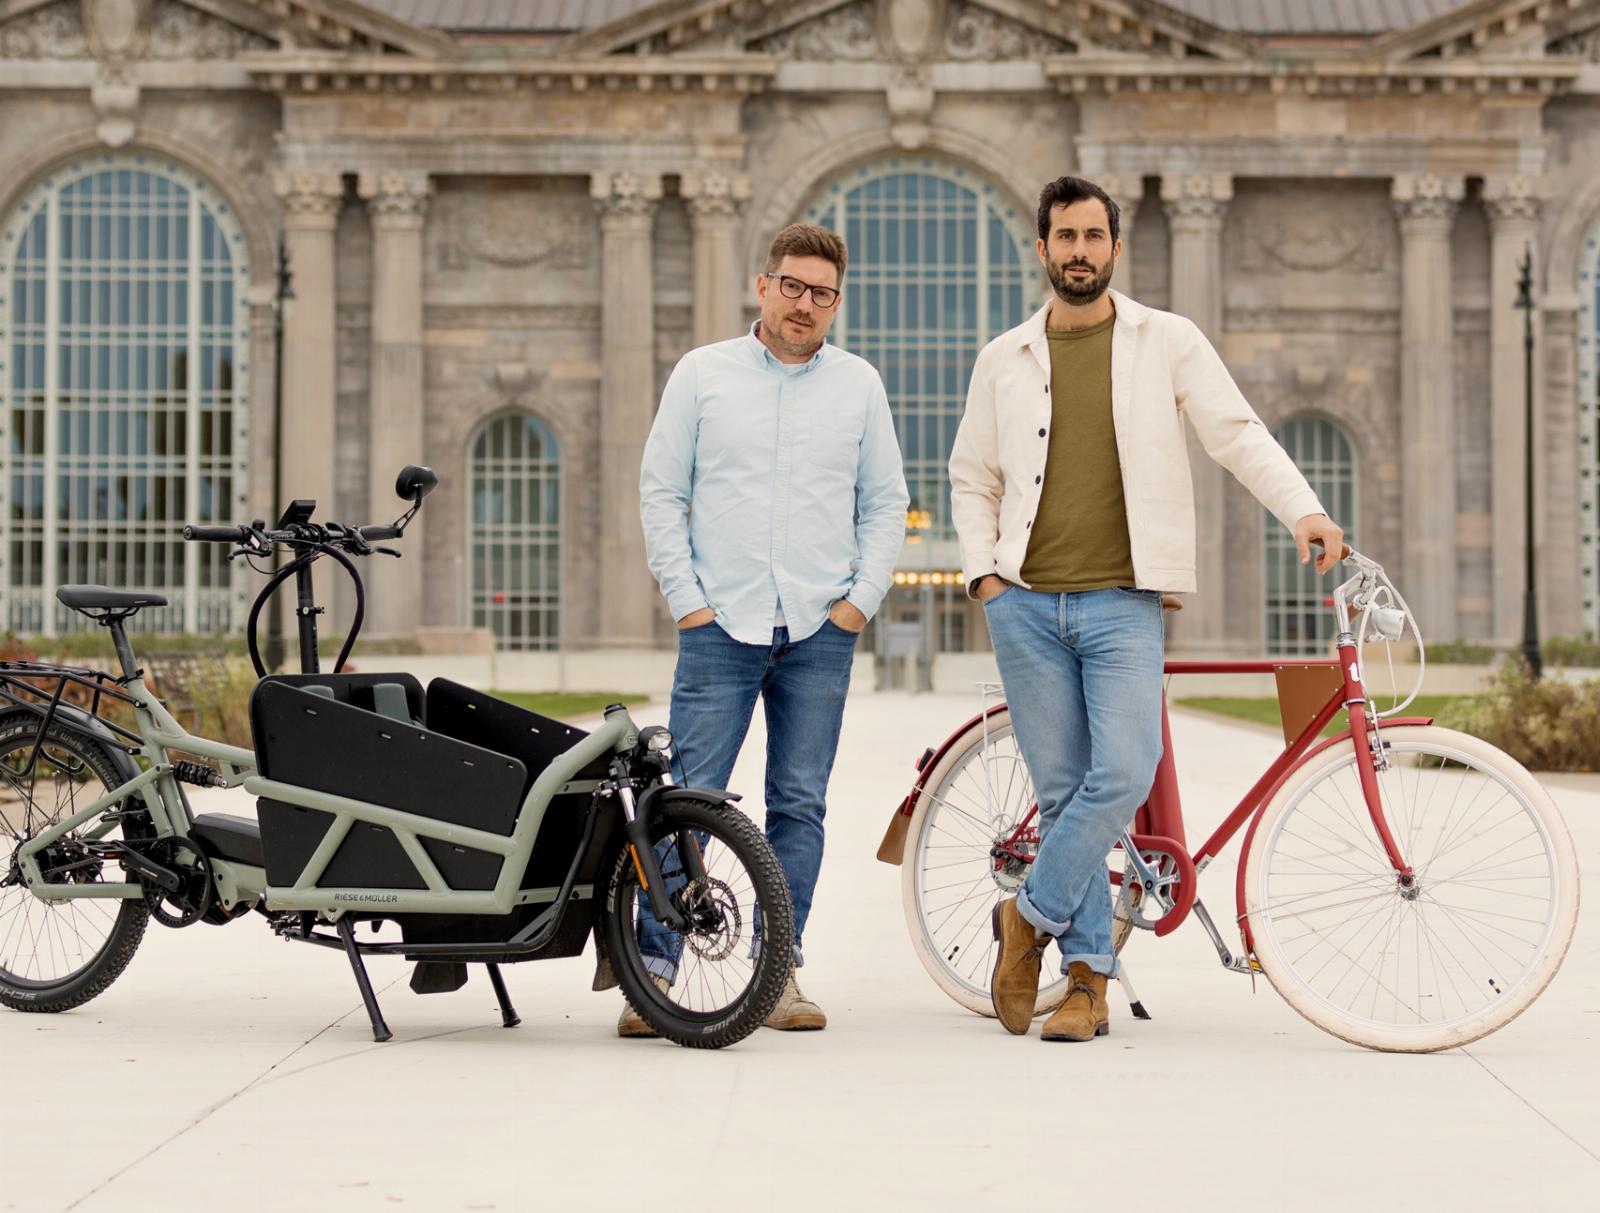 Bloom is reinventing how e-bikes are made in the US